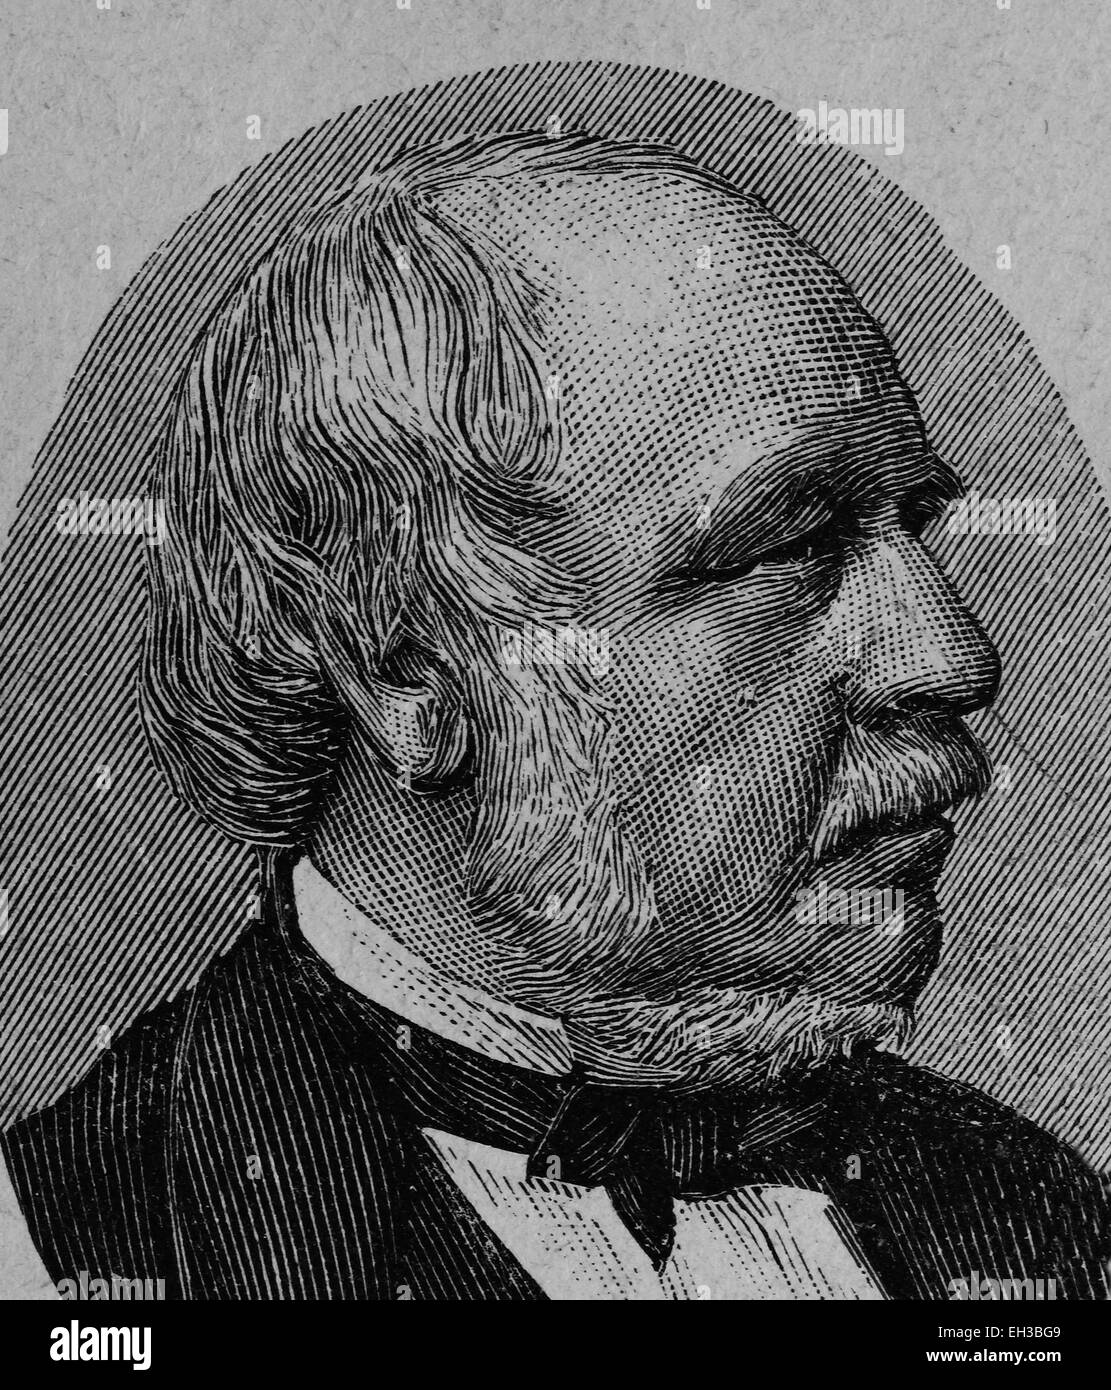 Gustav Mevissen, also known as Gustav von Mevissen since 1884, 1815 - 1899, a German businessman and politician, founder of numerous banks and insurance companies, pioneer of the German banking and insurance industry, wood engraving, about 1880 Stock Photo